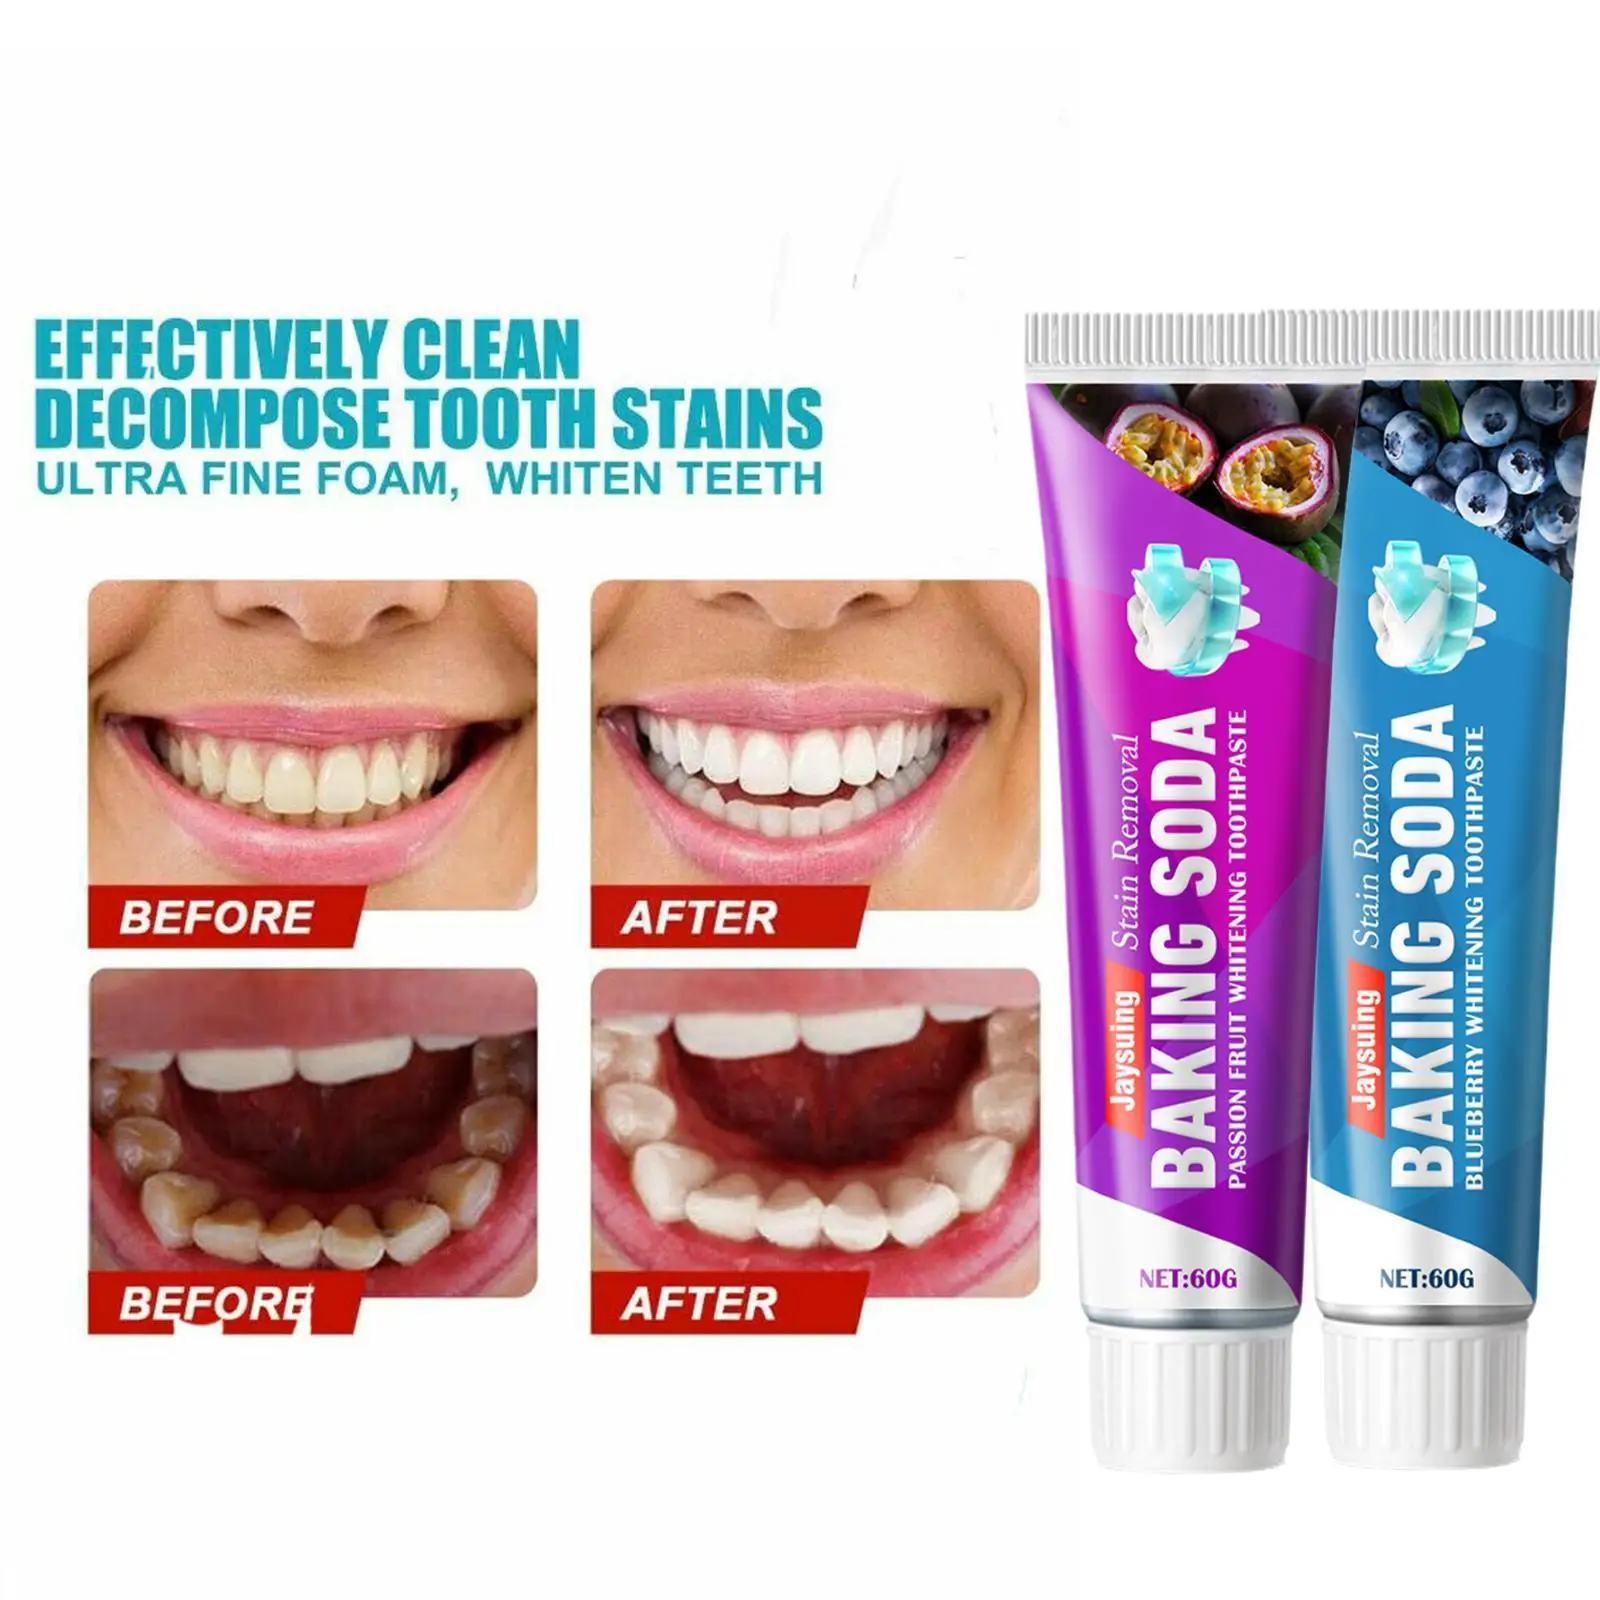 

Baking Soda Toothpaste Teeth Whitening Cleansing Teeth Teeth Paste Freshen Fruit Flavor Breath Stains Removal Tooth Whiteni M5X8